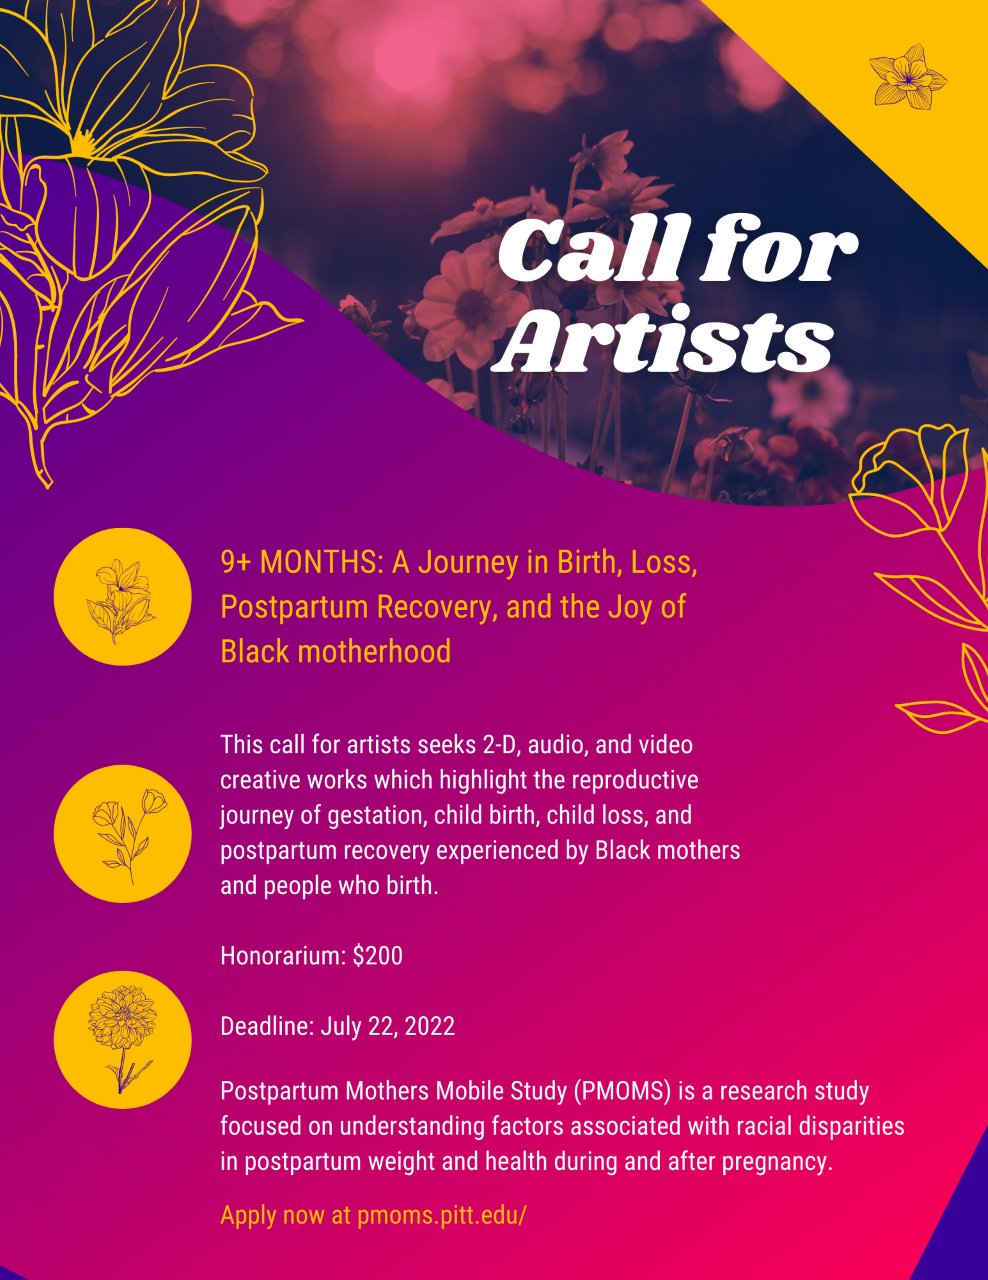 Call for Artists; 9+ MONTHS: A Journey in Birth, Loss, Postpartum Recovery, and the Joy of Black Motherhood; This call for artists seeks 2-D, audio, and video creative works which highlight the reproductive journey of gestation, child birth, child loss, and postpartum recovery experienced by Black mothers and people who give birth.; Honorarium: $200; Deadline: July 22, 2022